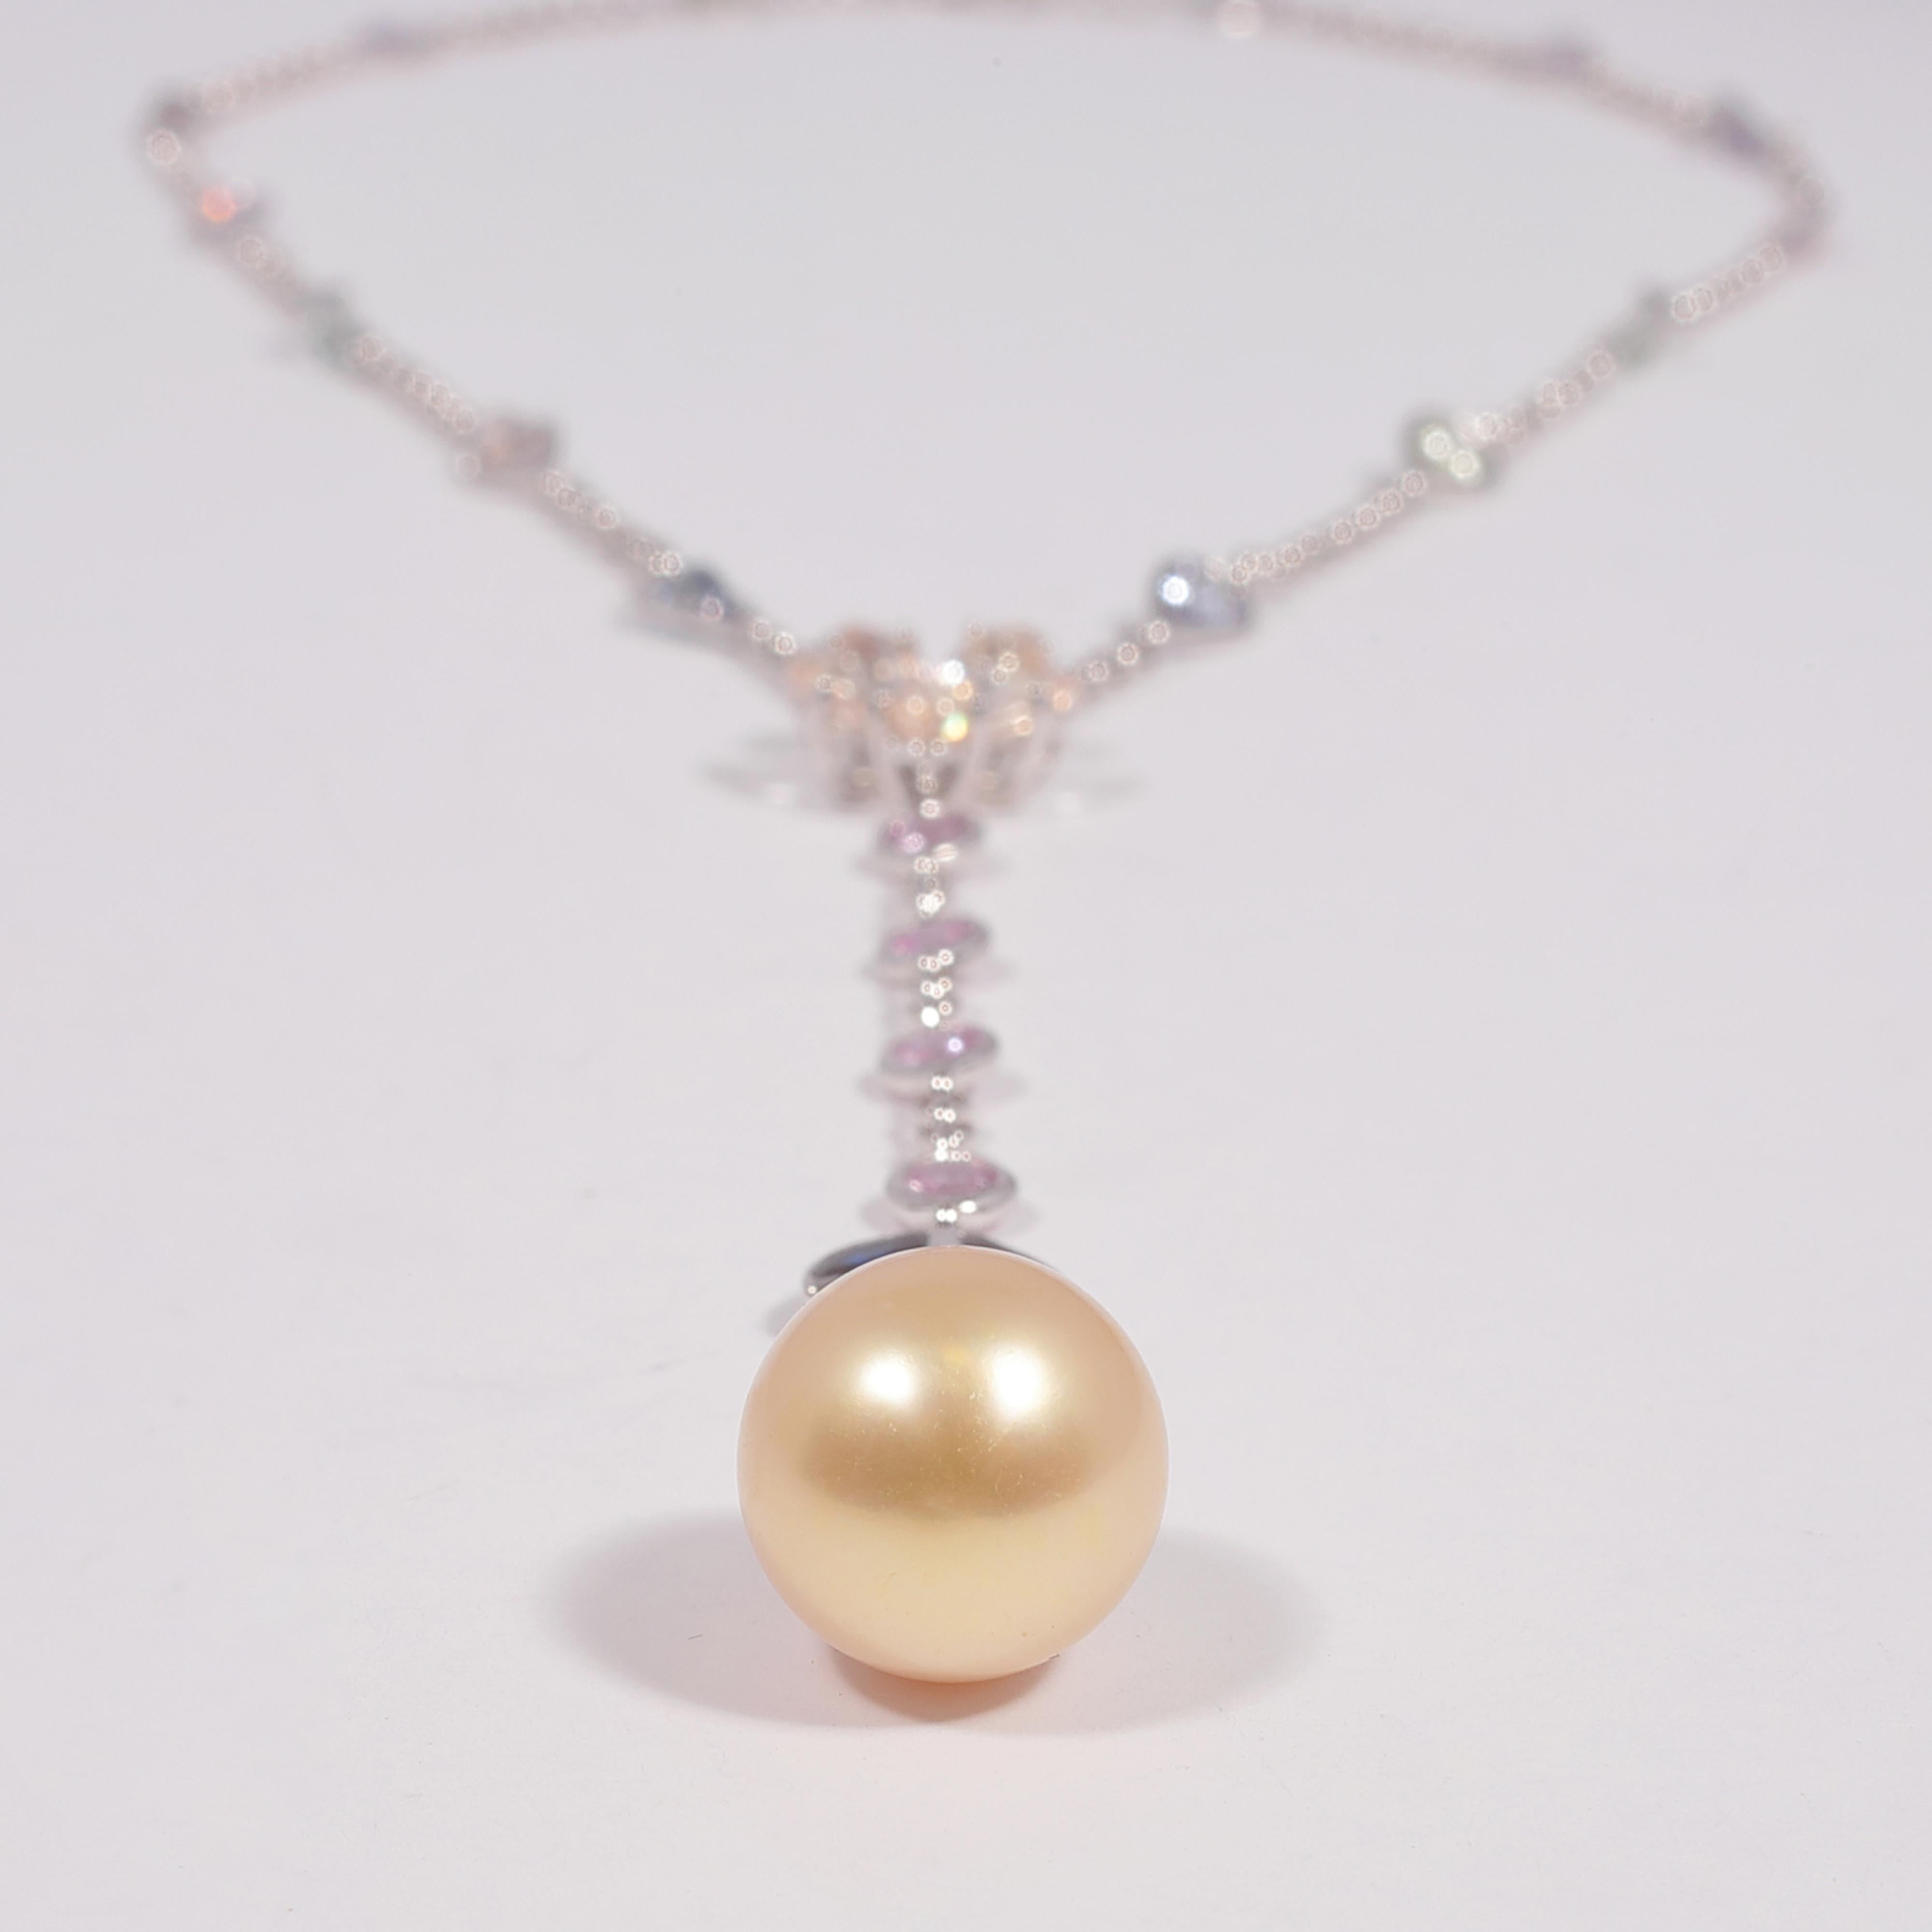 In 18 karat white gold, this necklace has a great swing to it!   For formal or casual occasions, this is a versatile piece.  The yellow South Sea pearl measures approximately 12.70 mm x 11.45 mm and is complimented by the array of gemstones set into